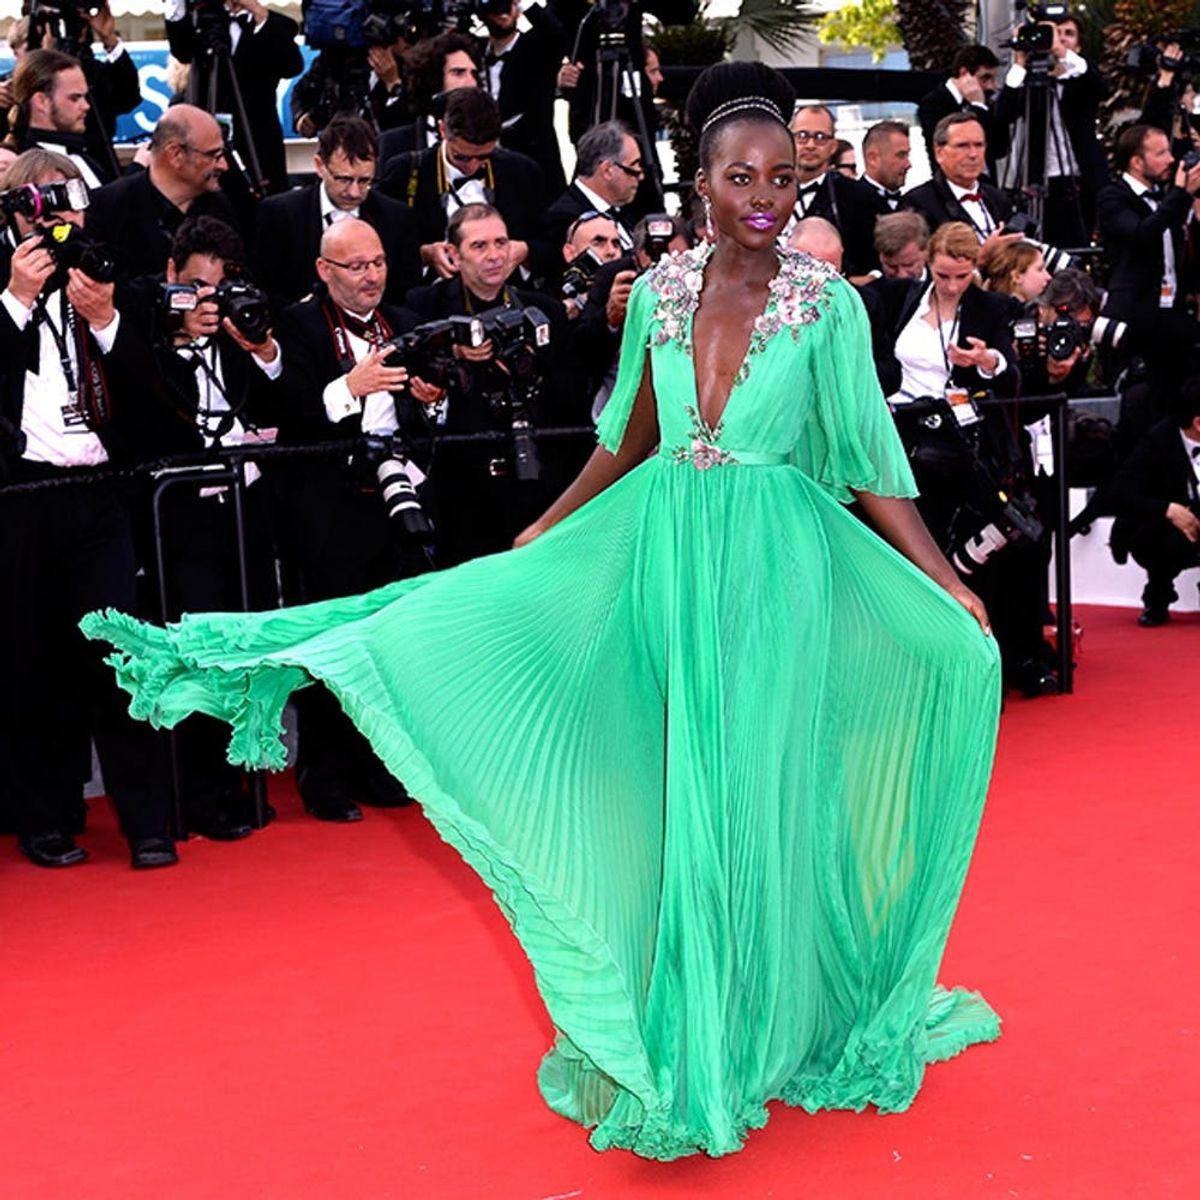 The 10 Best Looks from the First Day of Cannes